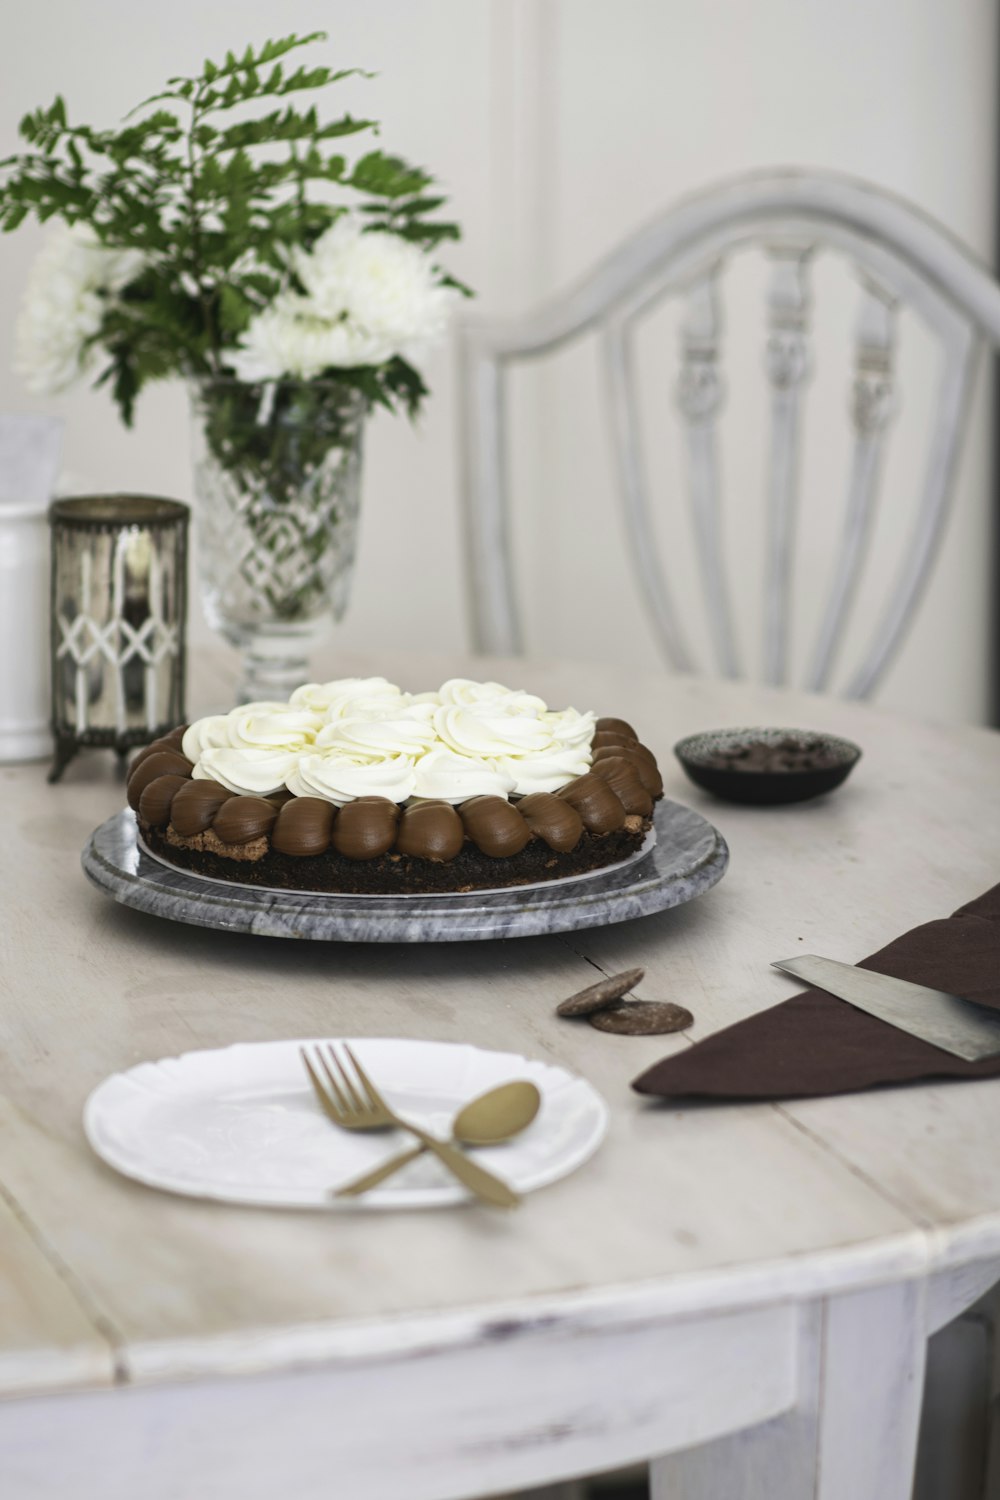 brown and white cake on white ceramic plate